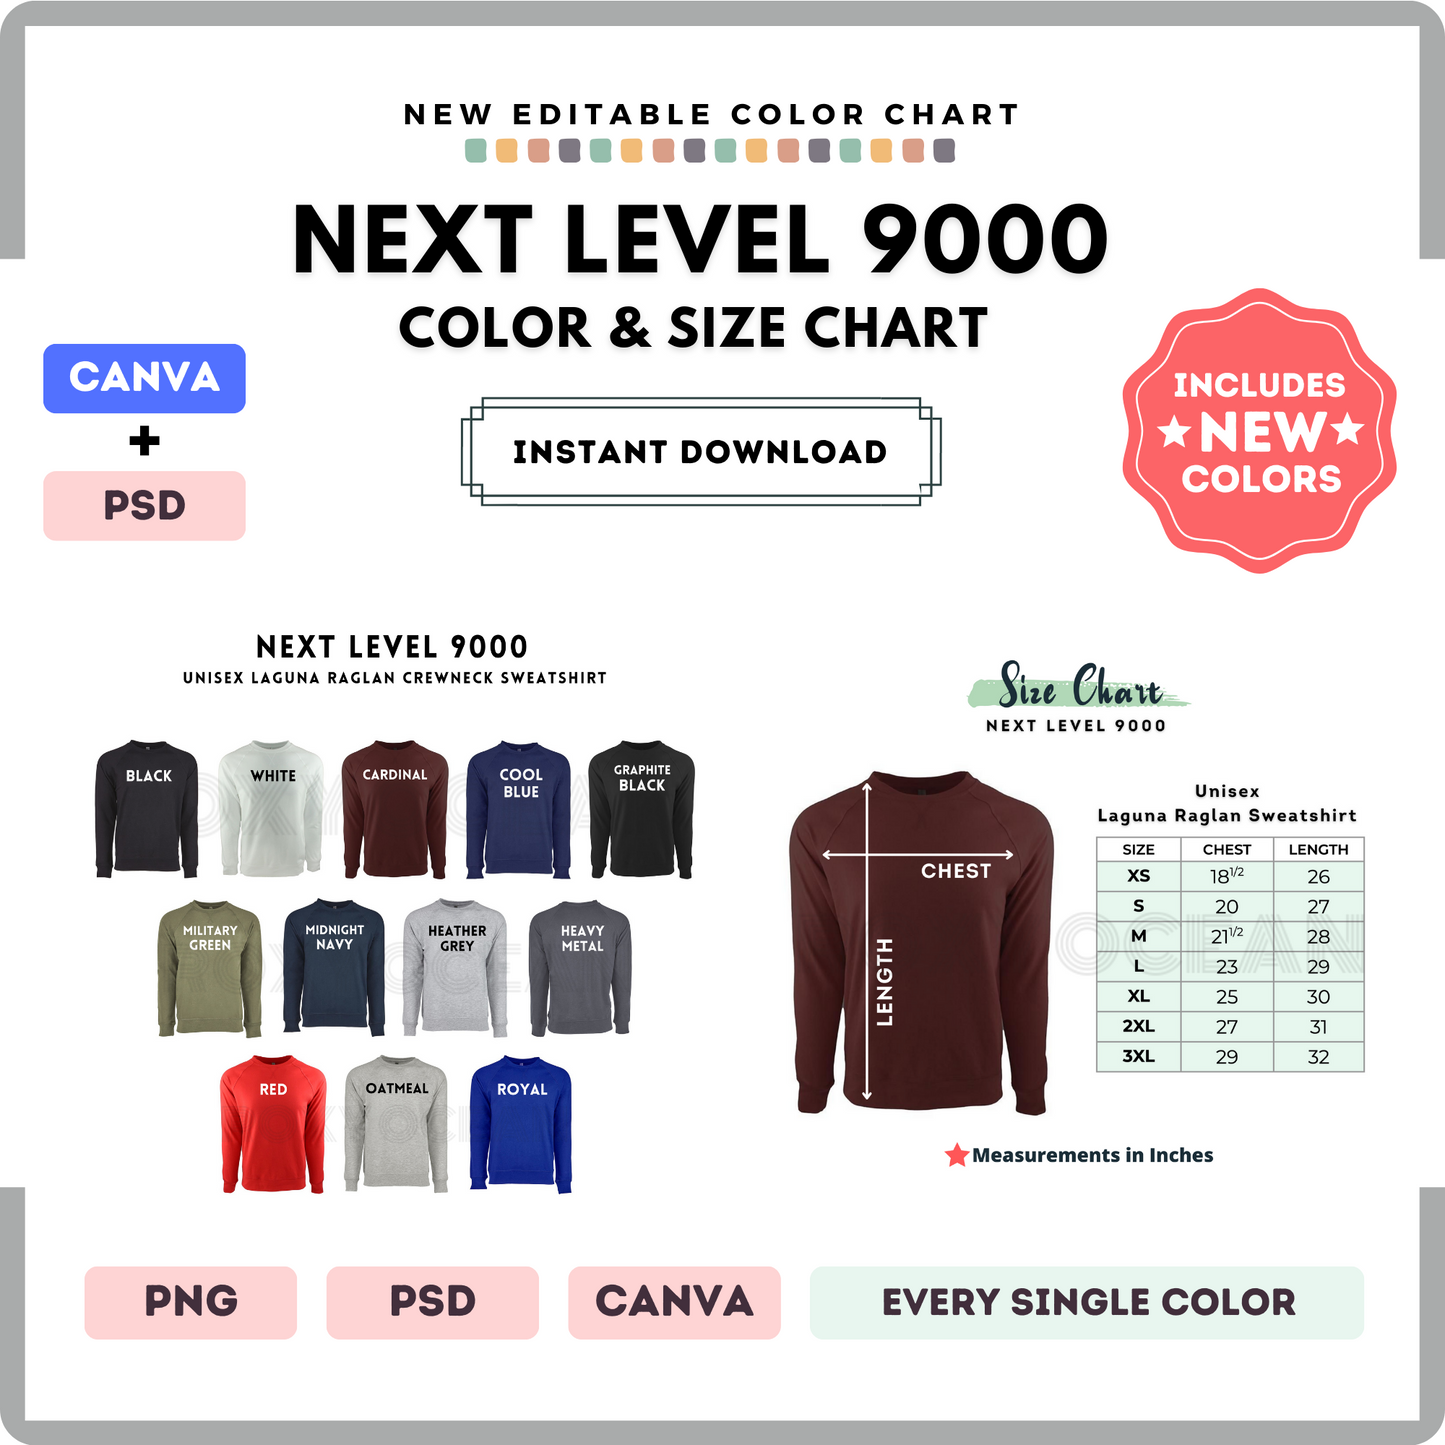 Next Level 9000 Color and Size Chart